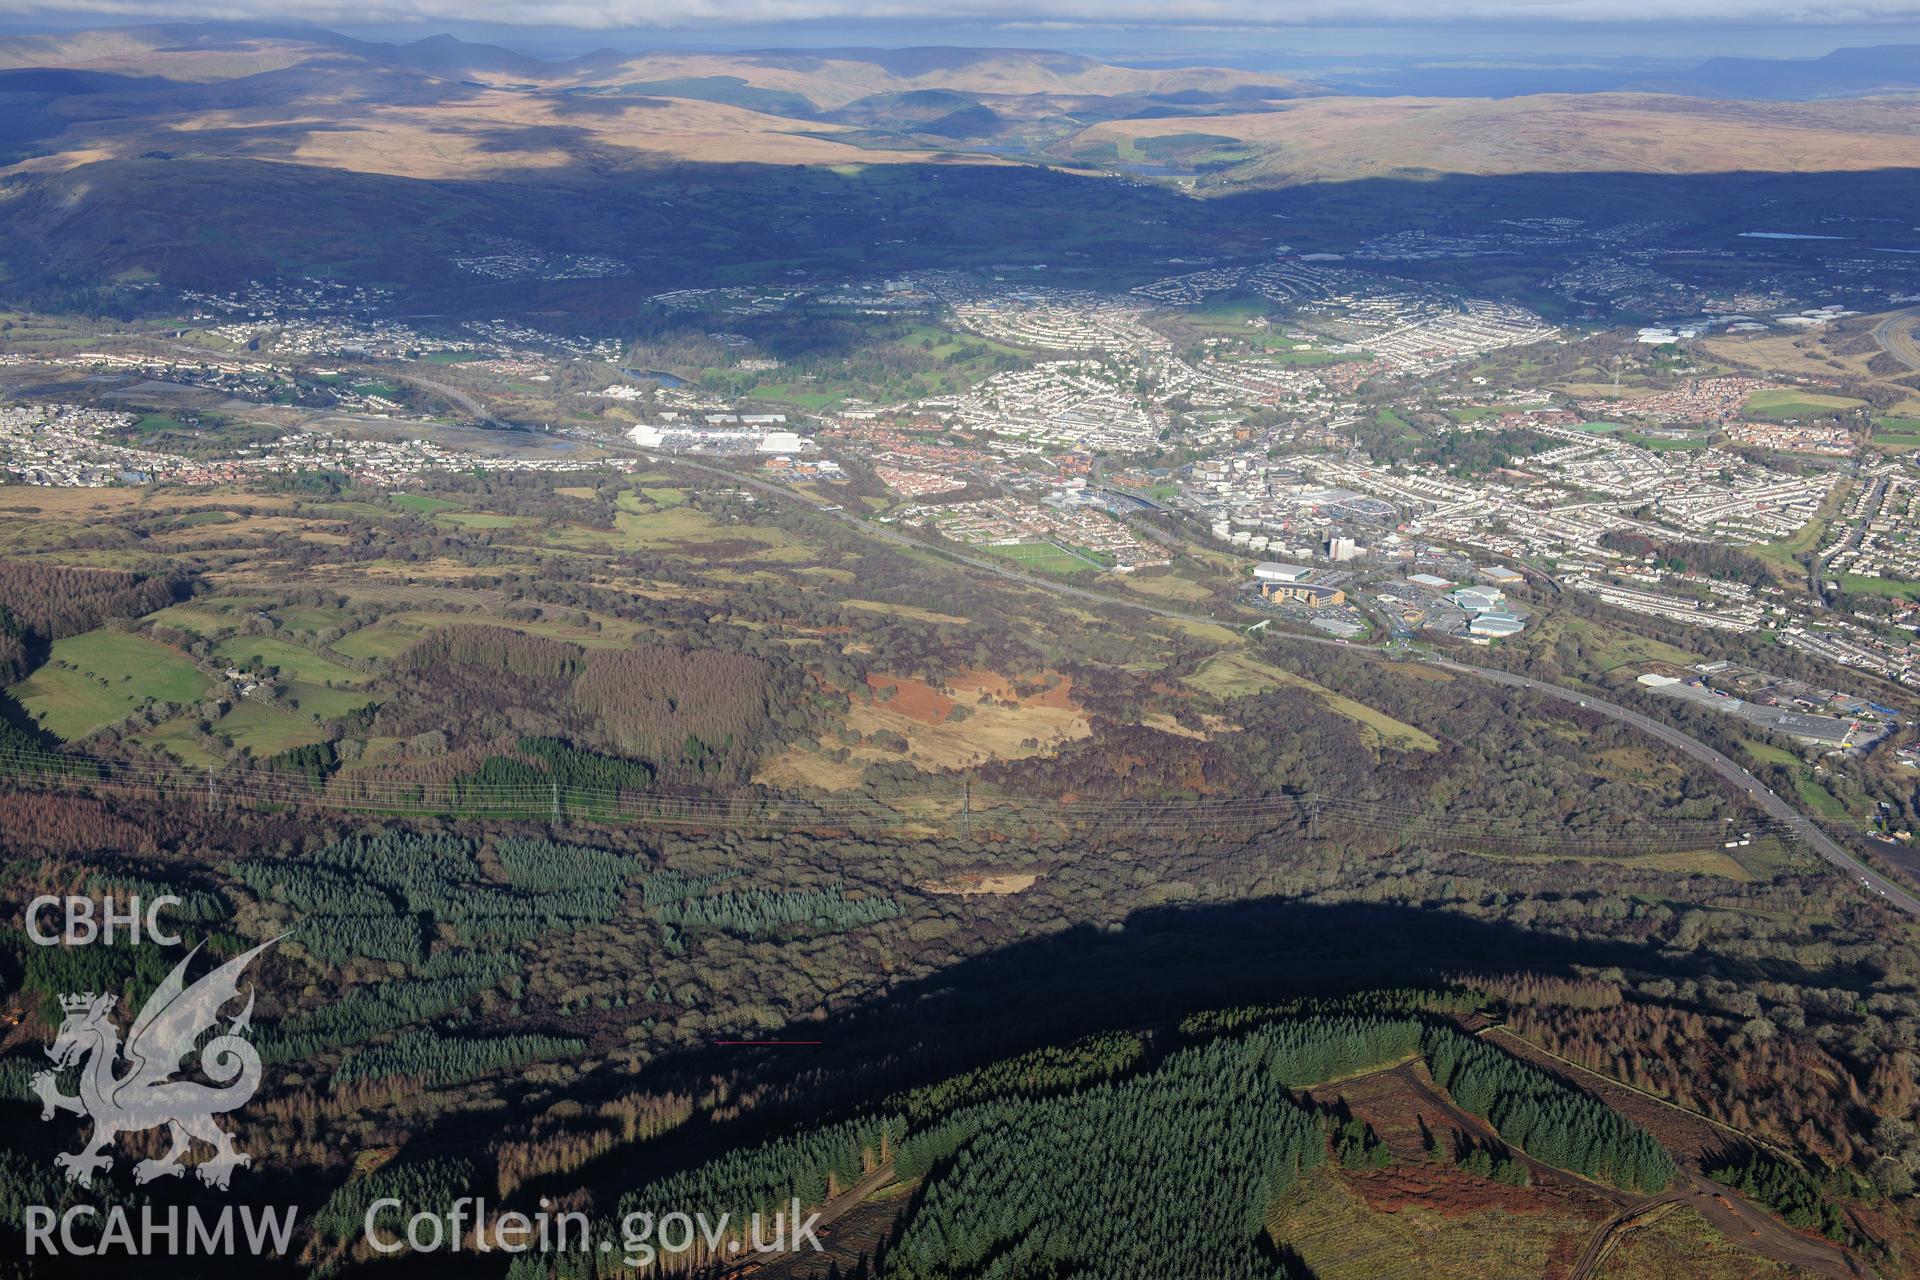 RCAHMW colour oblique photograph of Merthyr Tydfil, townscape from south-west. Taken by Toby Driver on 28/11/2012.